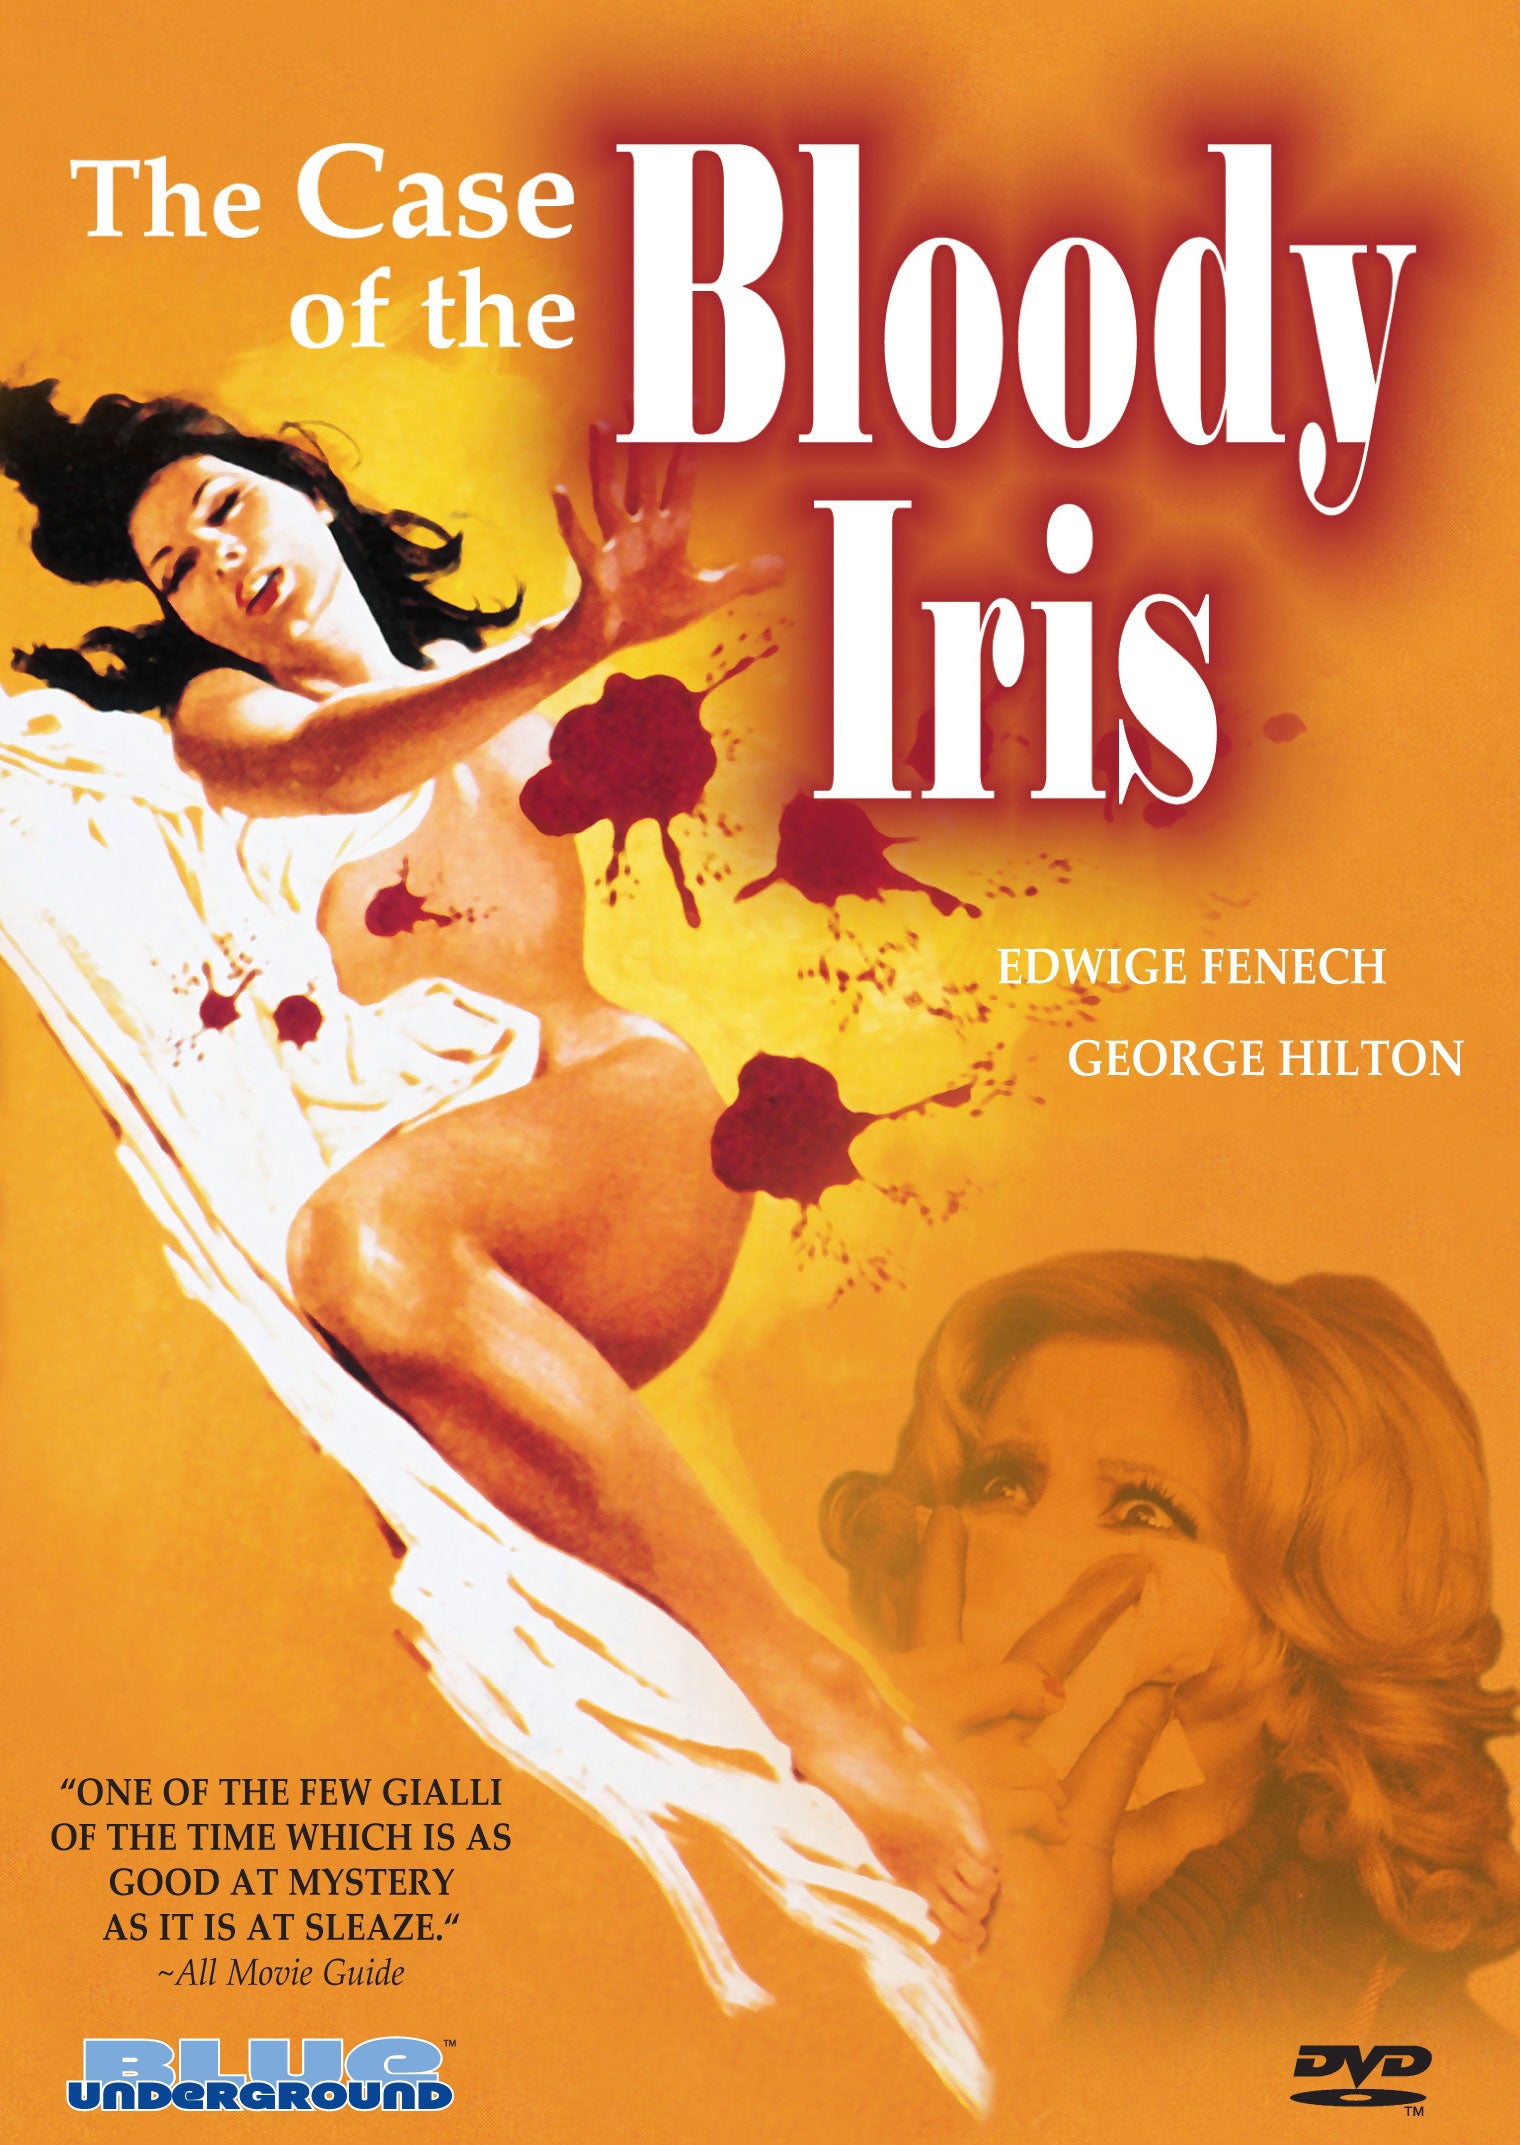 THE CASE OF THE BLOODY IRIS DVD